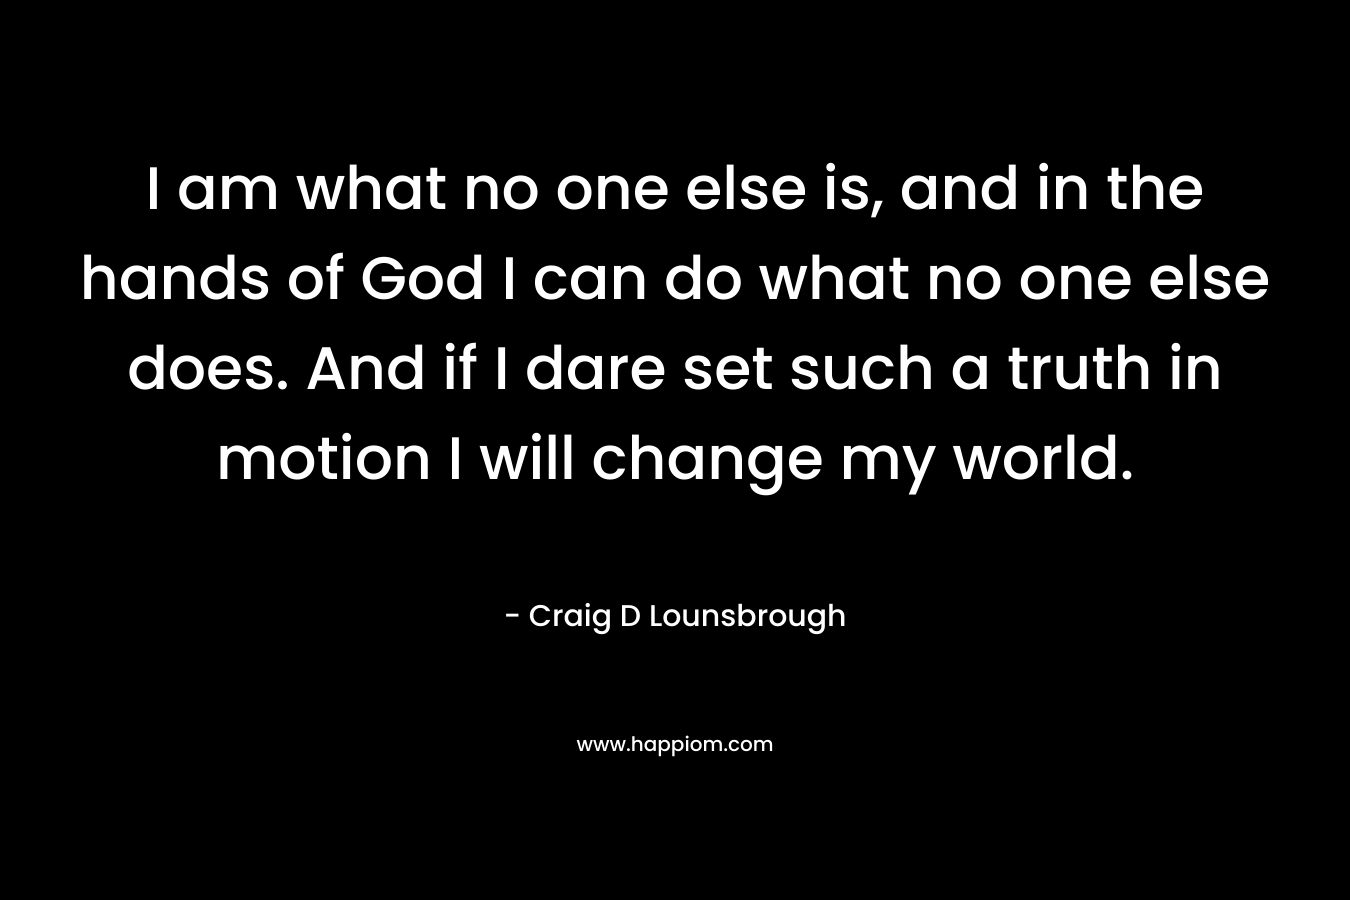 I am what no one else is, and in the hands of God I can do what no one else does. And if I dare set such a truth in motion I will change my world.